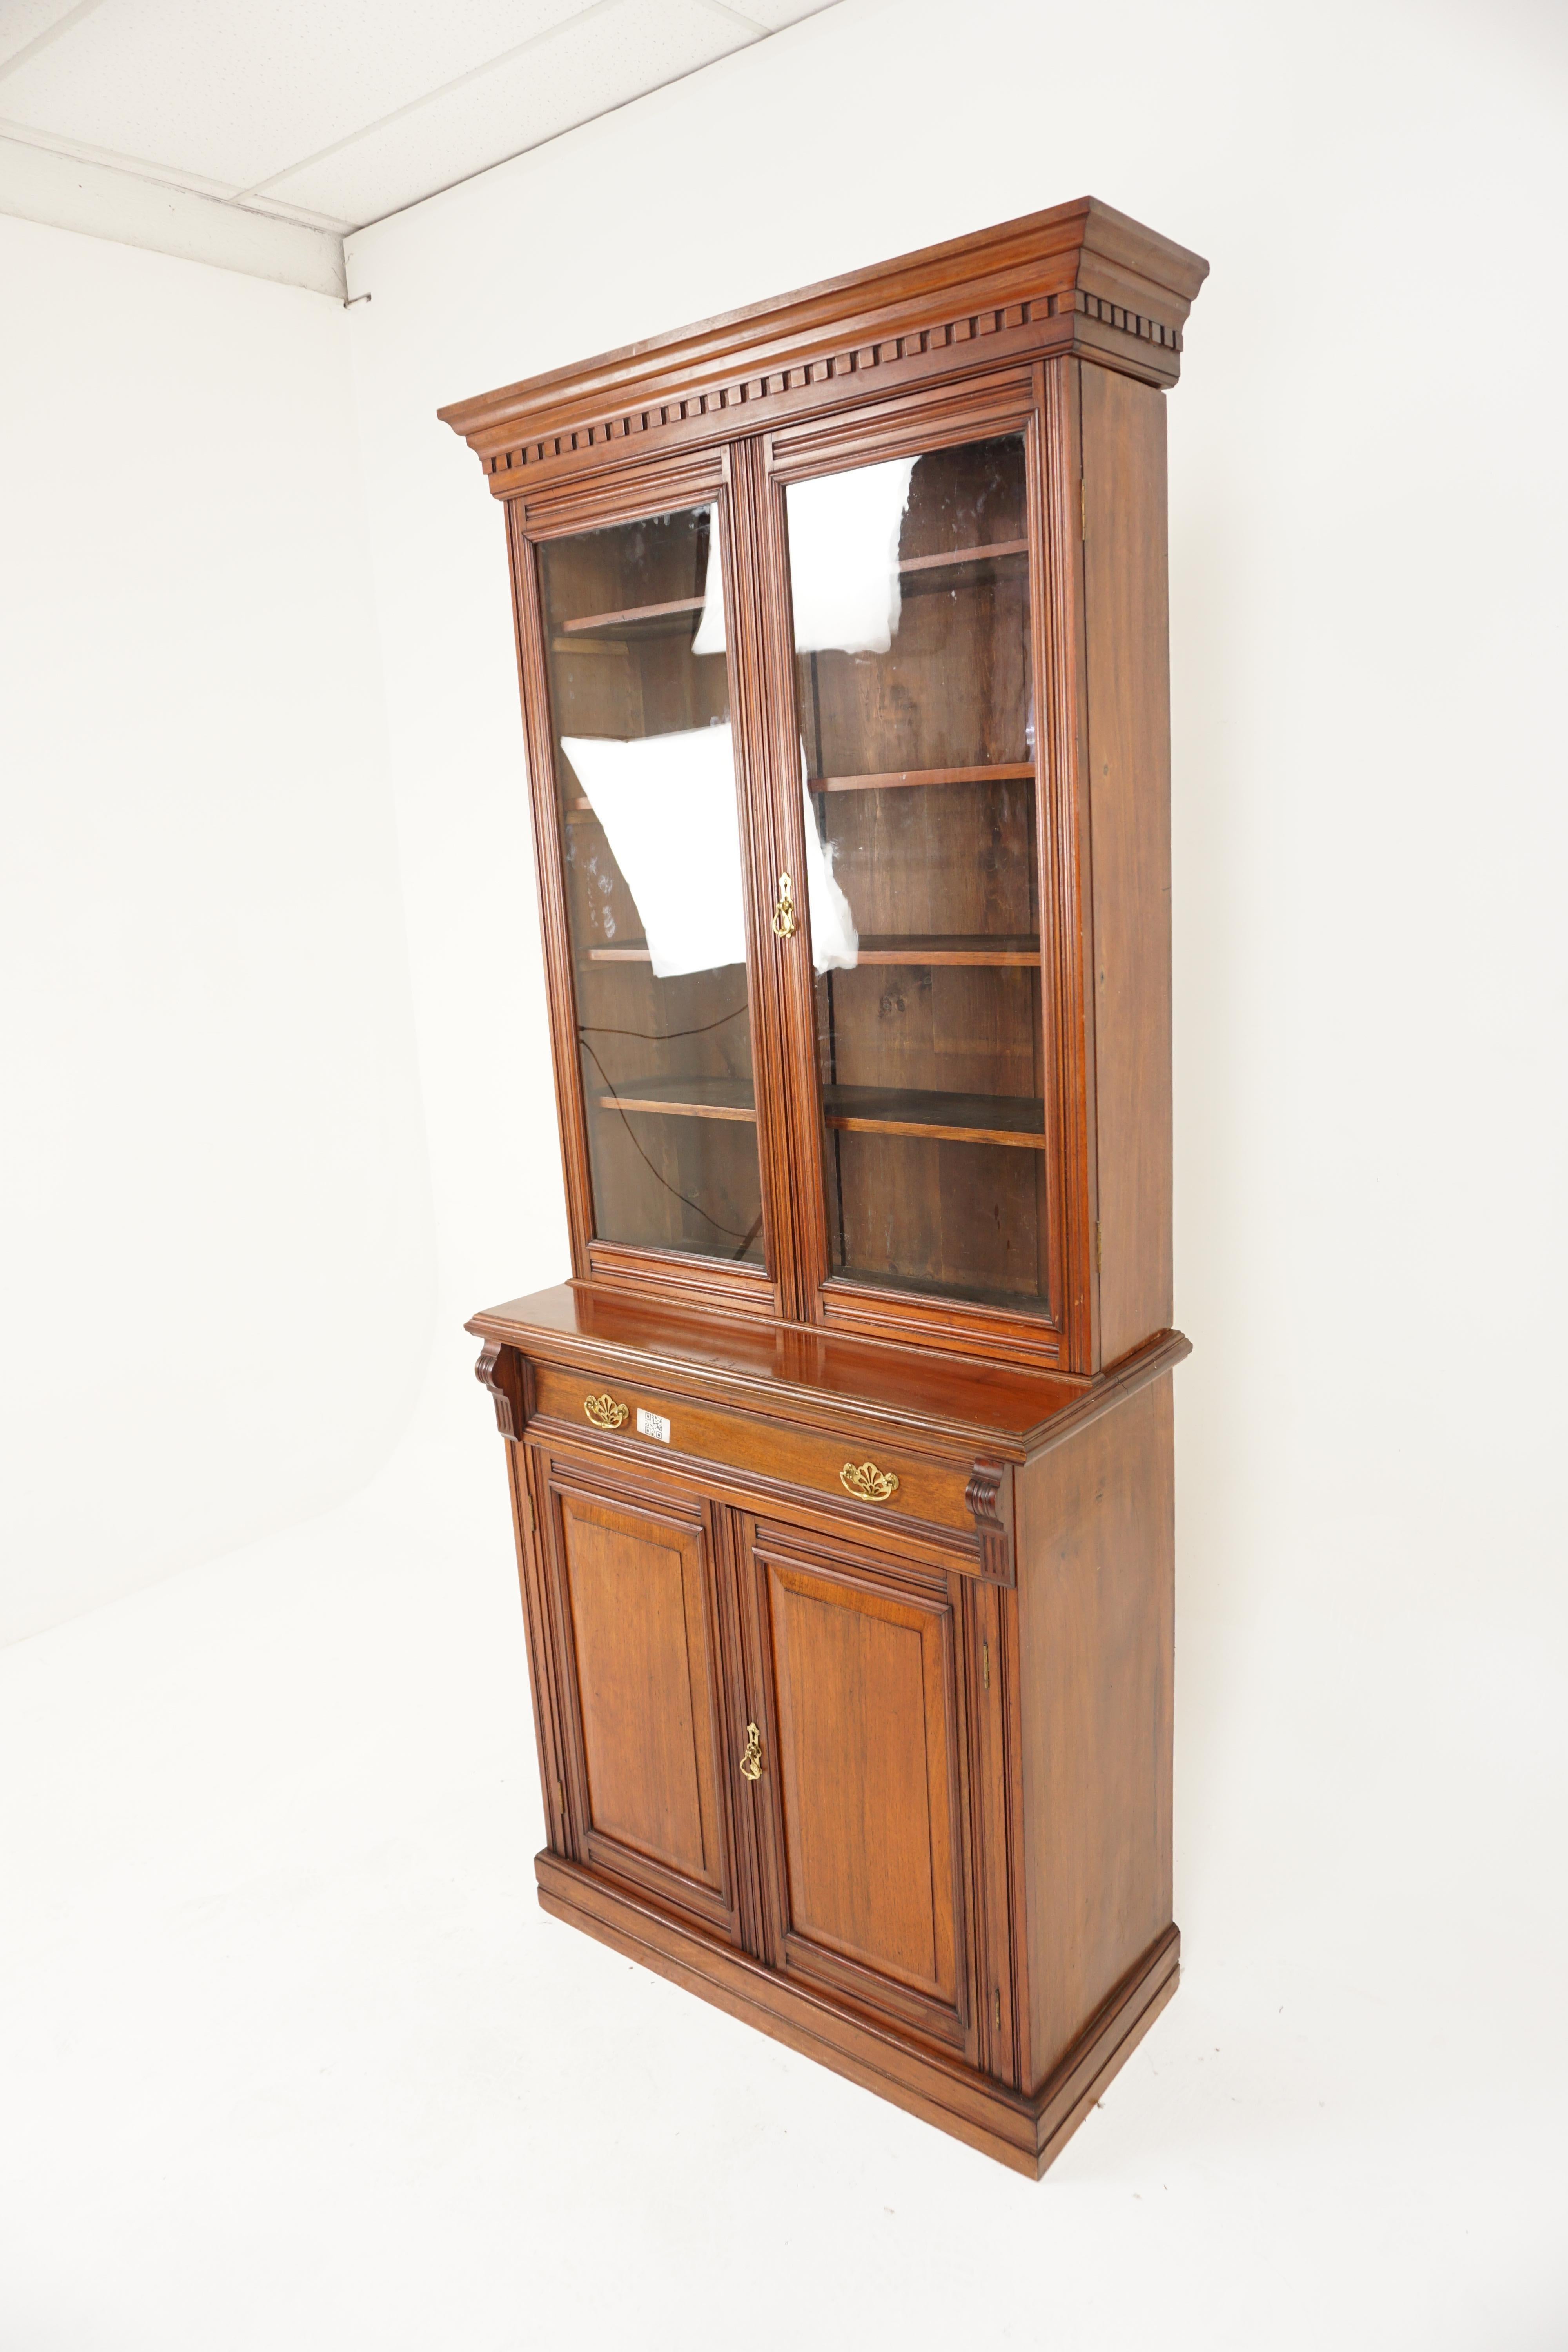 Antique Victorian Walnut 4 Door Glass Front Bookcase Display Cabinet, Scotland 1870, H990

Solid walnut
Original finish
Having a moulded cornice with a dentil frieze
Pair of original glass doors with four adjustable shelves
The base has a single